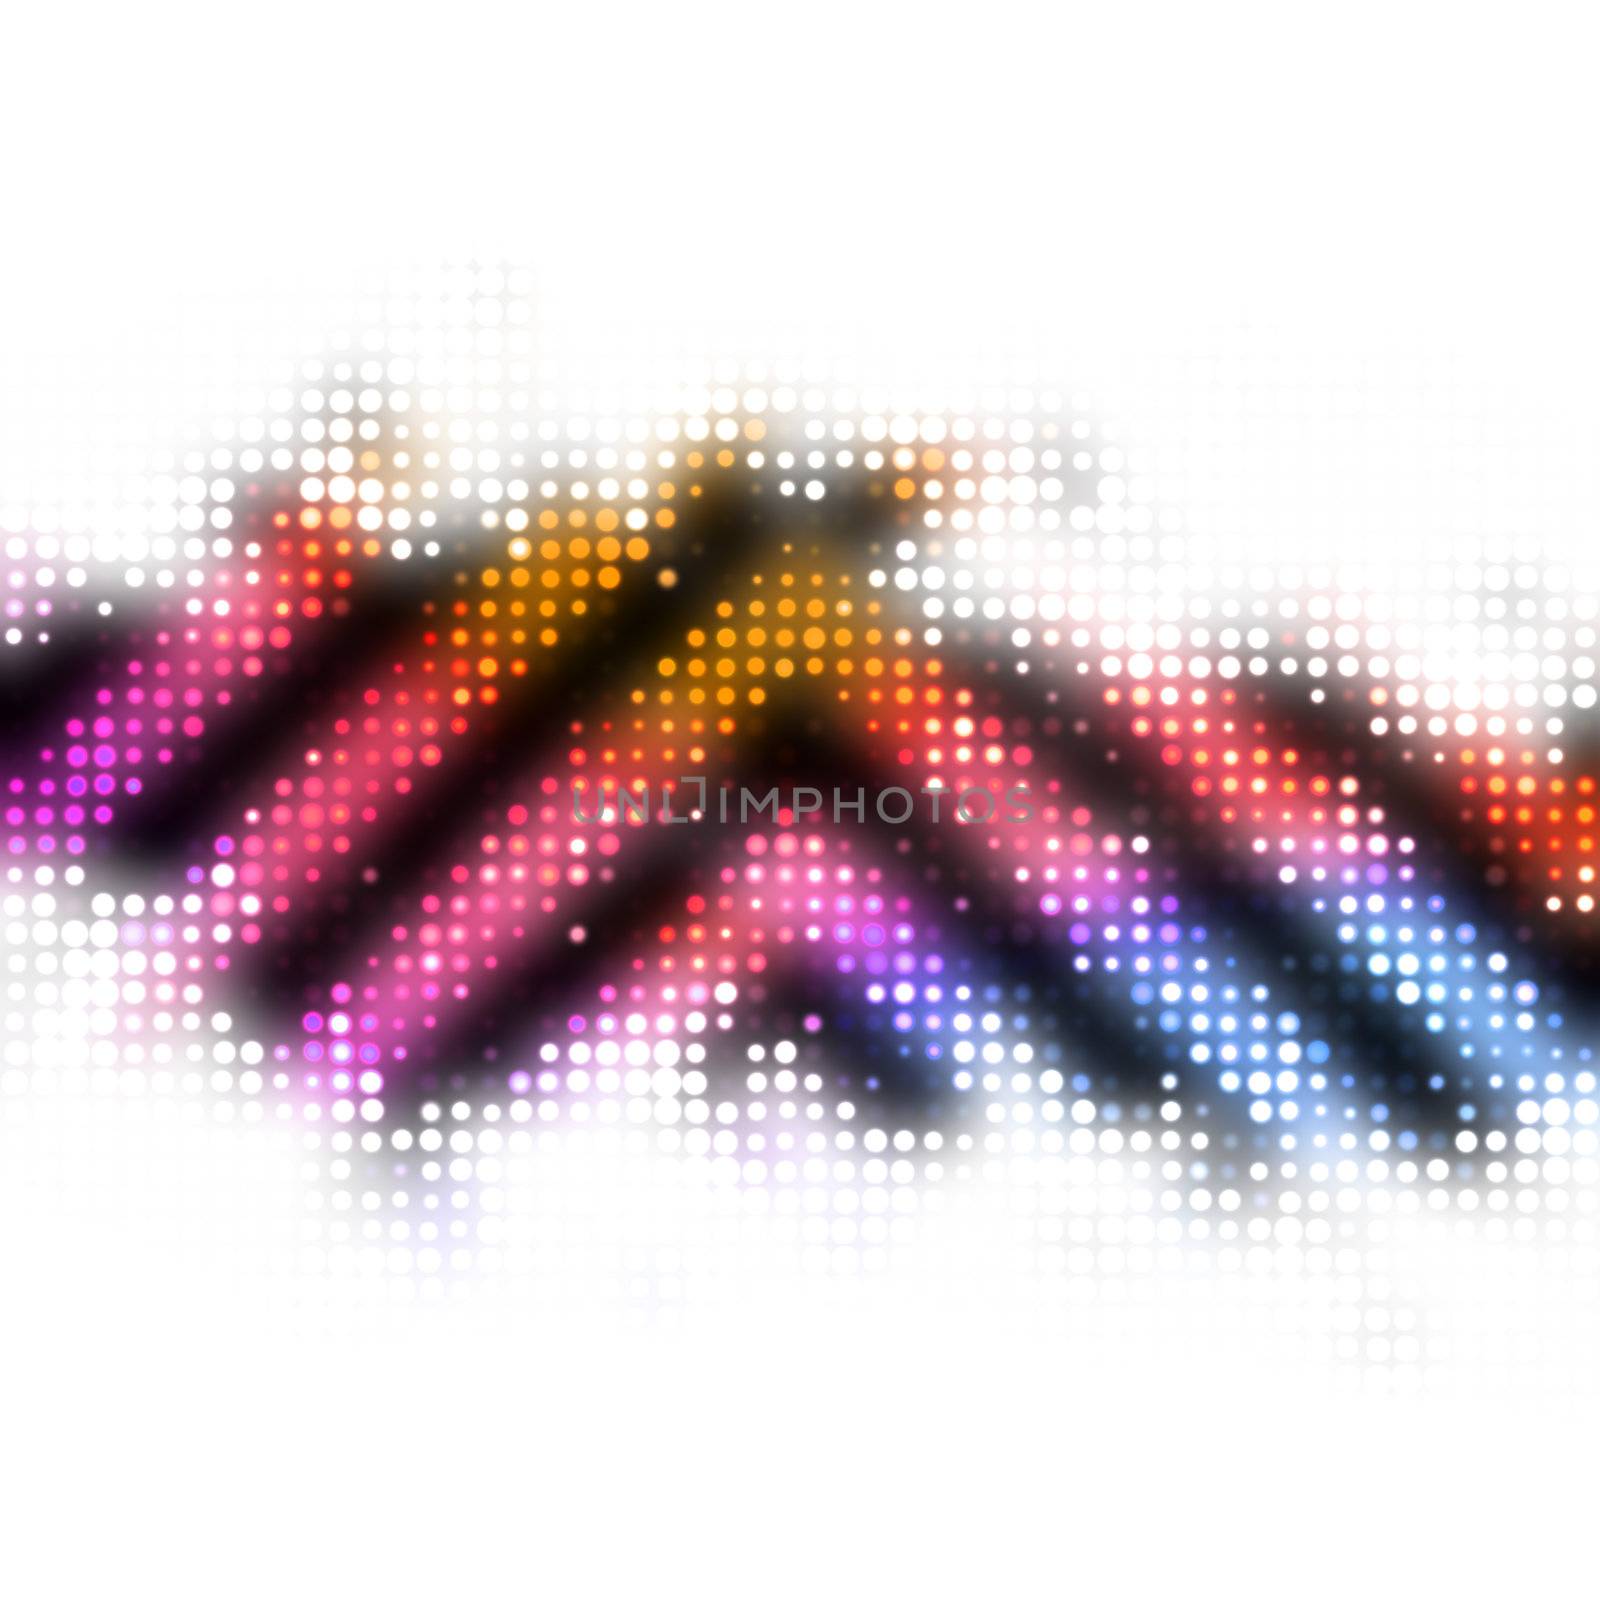 Abstract illustration with colorful glowing dots in a striped pattern isolated over a white background.